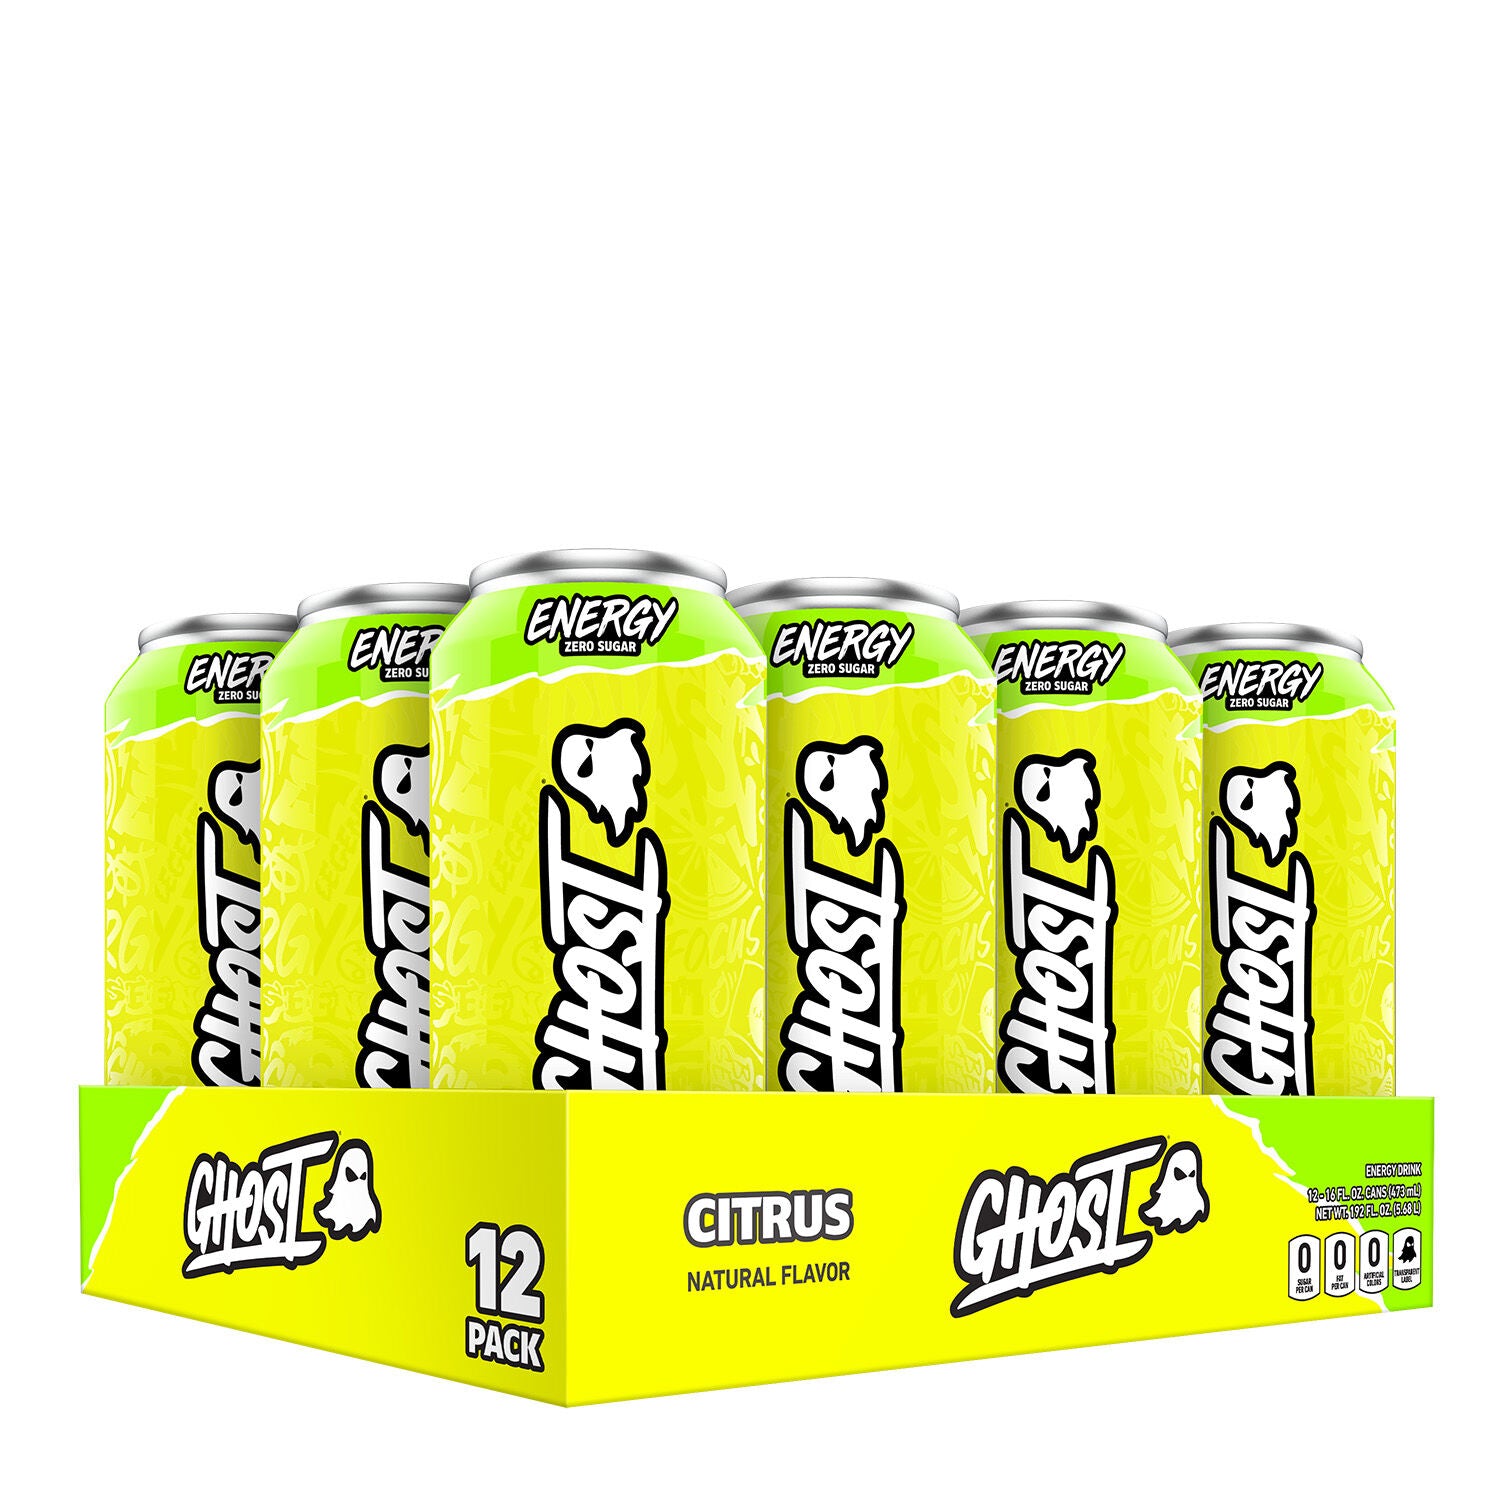 GHOST Energy Drink (1 case of 12 cans) Protein Snacks Citrus GHOST ghost-energy-drink-1-case-of-12-cans